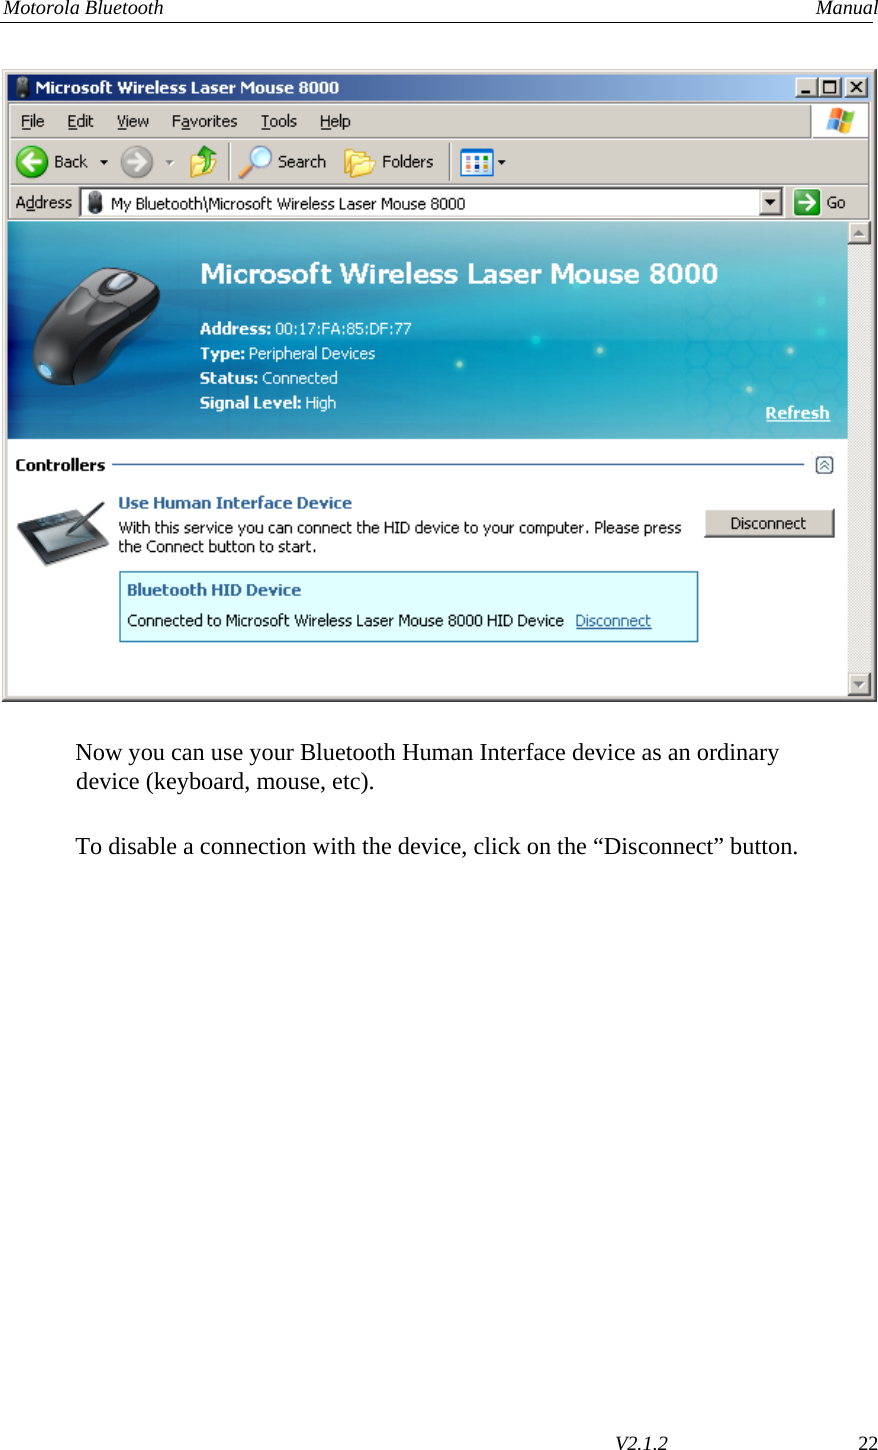 Motorola Bluetooth    Manual        V2.1.2  22  Now you can use your Bluetooth Human Interface device as an ordinary device (keyboard, mouse, etc).  To disable a connection with the device, click on the “Disconnect” button. 